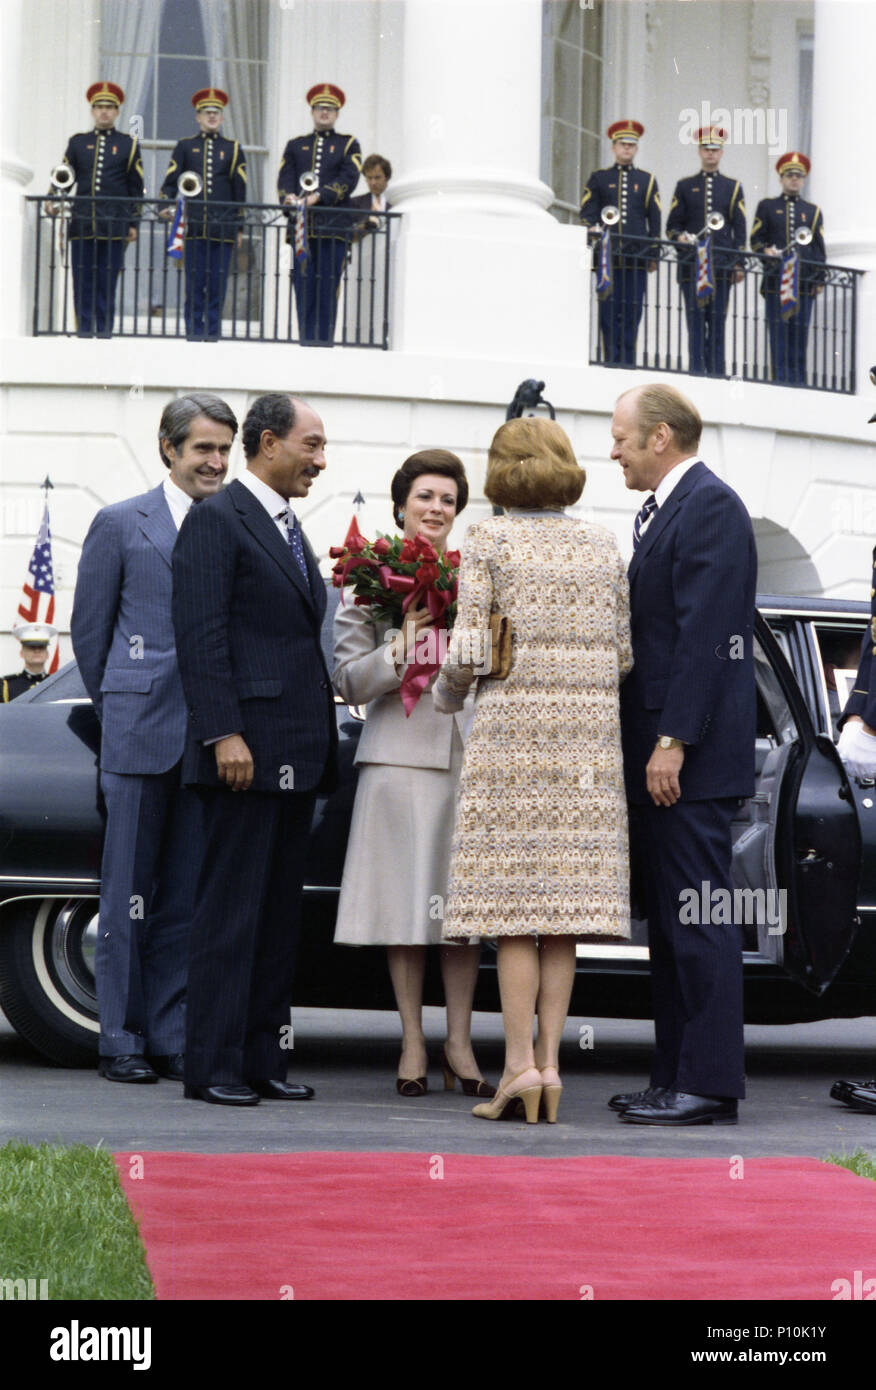 1975, October 27 – South Driveway – The White House –  Gerald R. Ford, Betty Ford; President & Mrs. Al-Sadat; Marine Corps Band; Henry Catto – Fords greet Sadats at limousine, roses given to Mrs. Al-Sadat; Betty Ford’s back to camera – State Visit of Egyptian President & Mrs. Anwar Al-Sadat - Arrival Ceremony Stock Photo